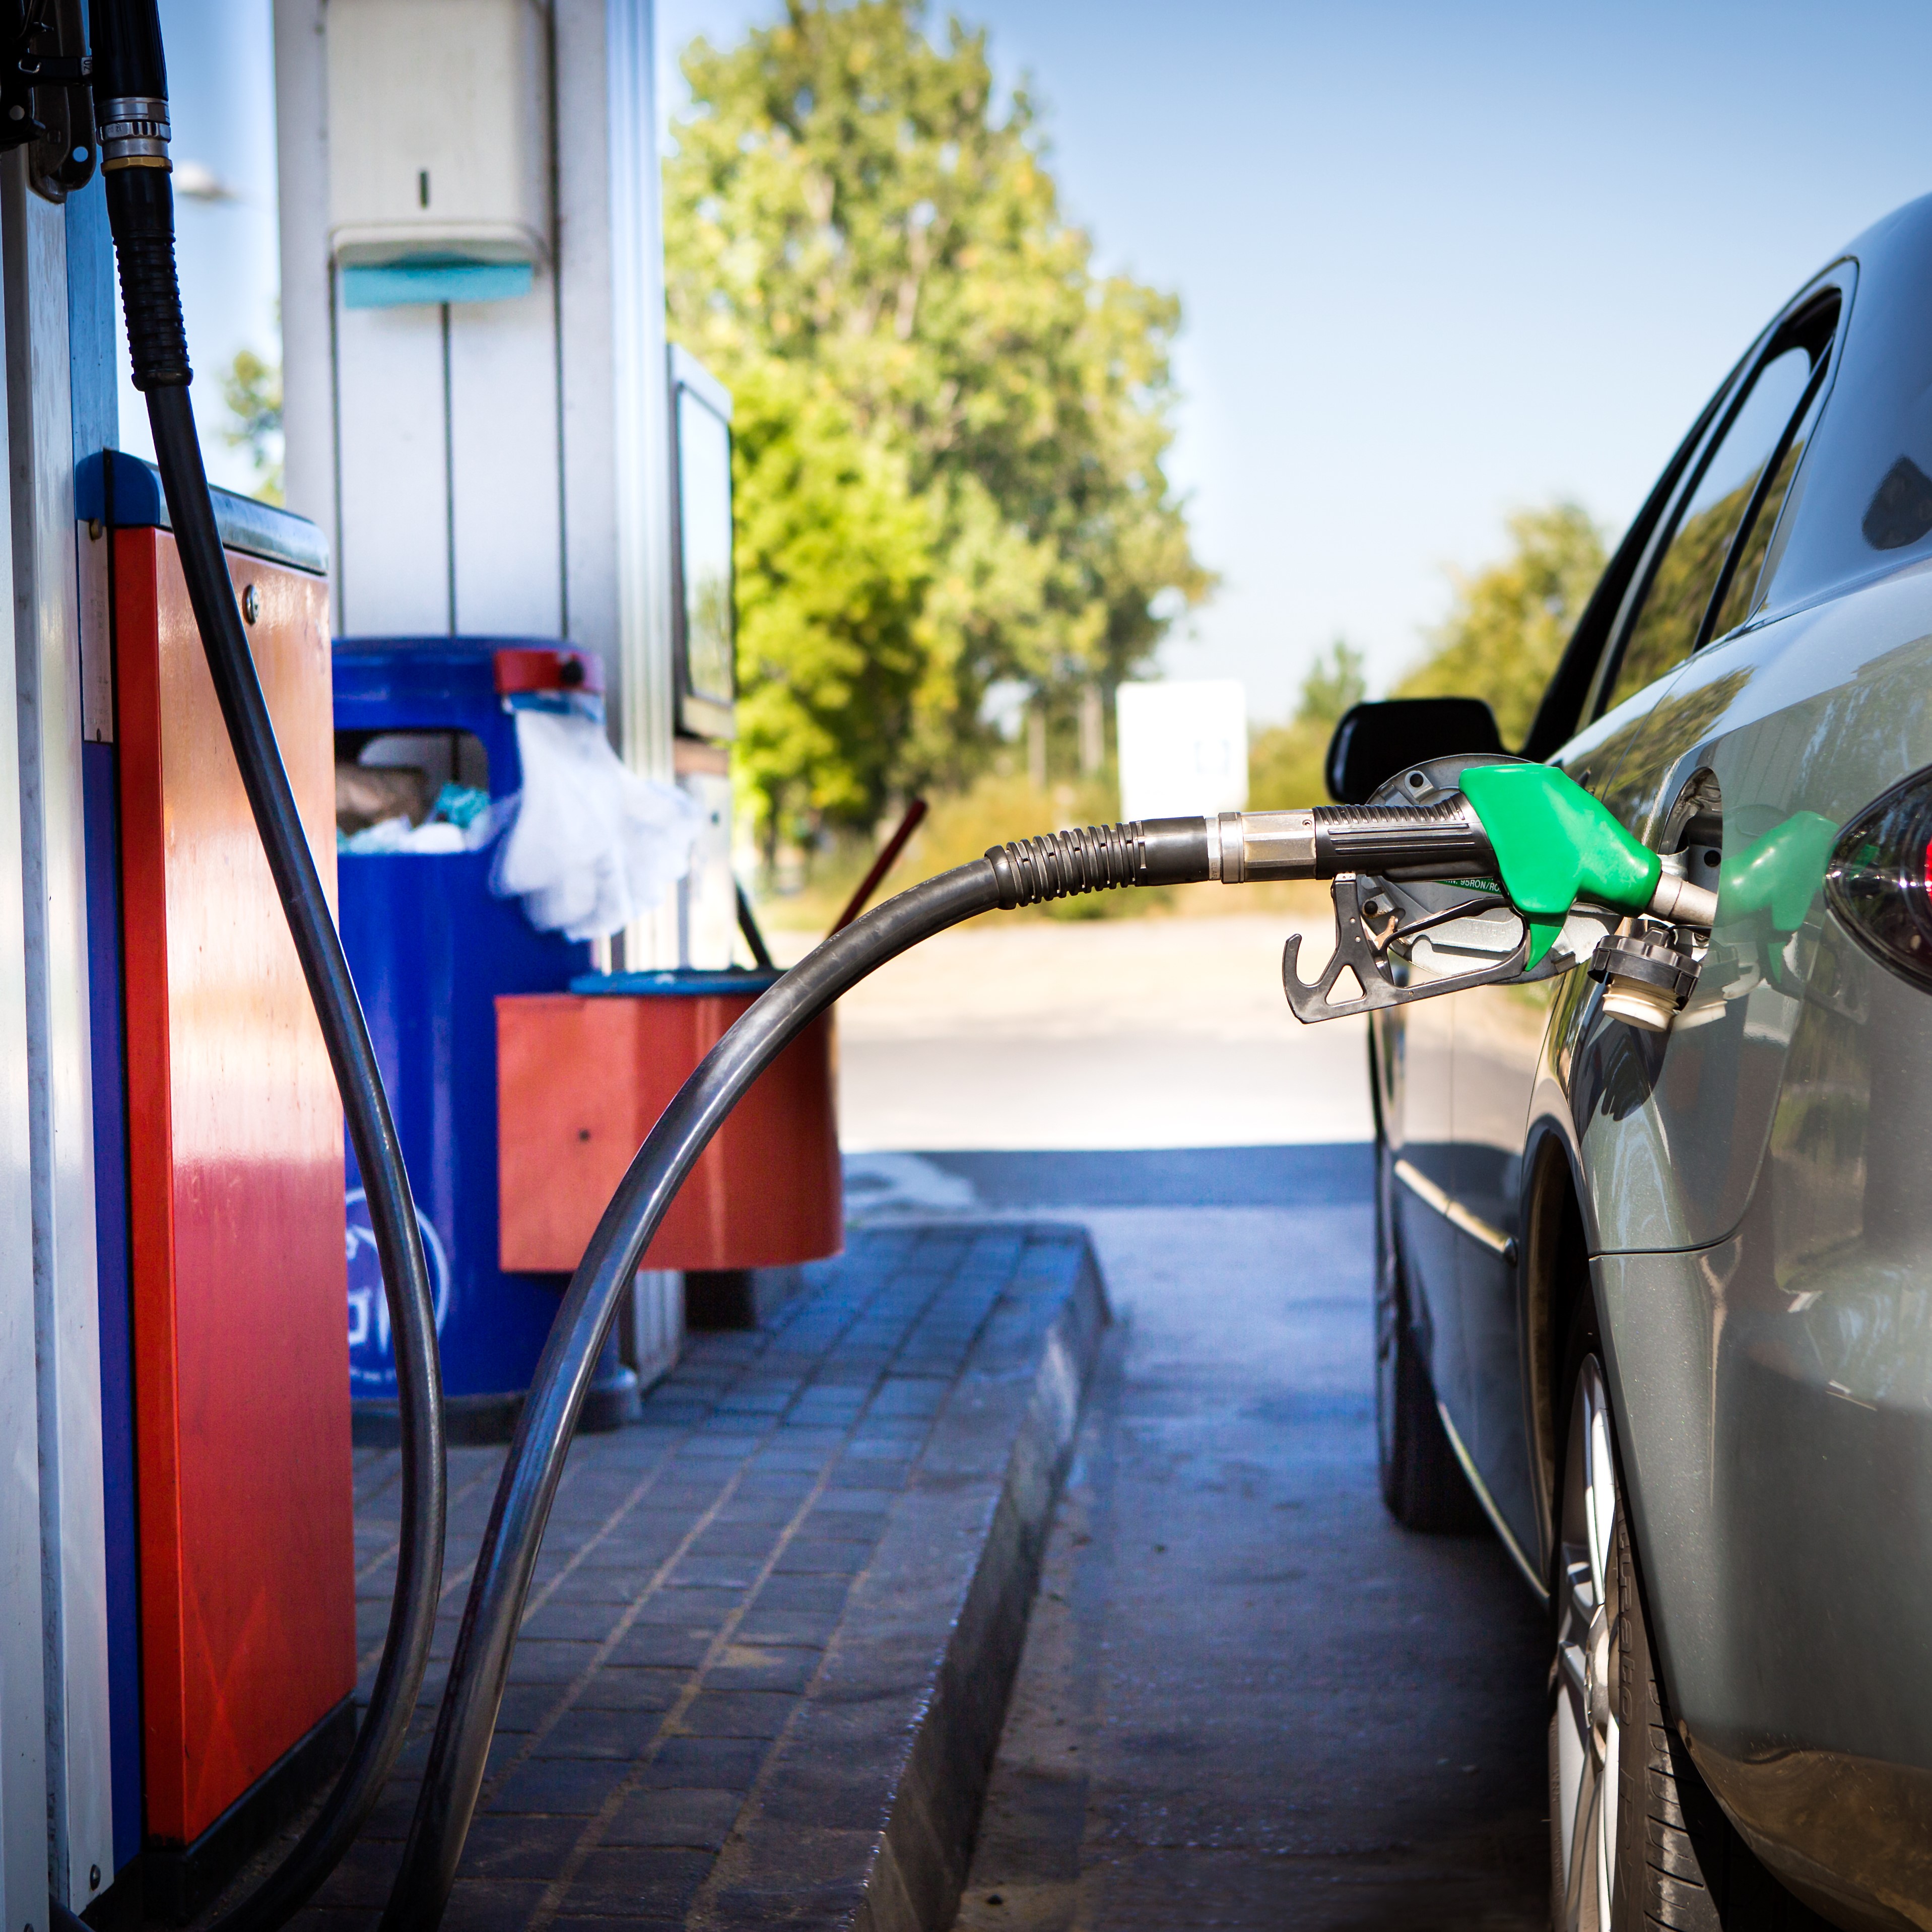 A new survey finds Americans are driving less as gas prices remain high